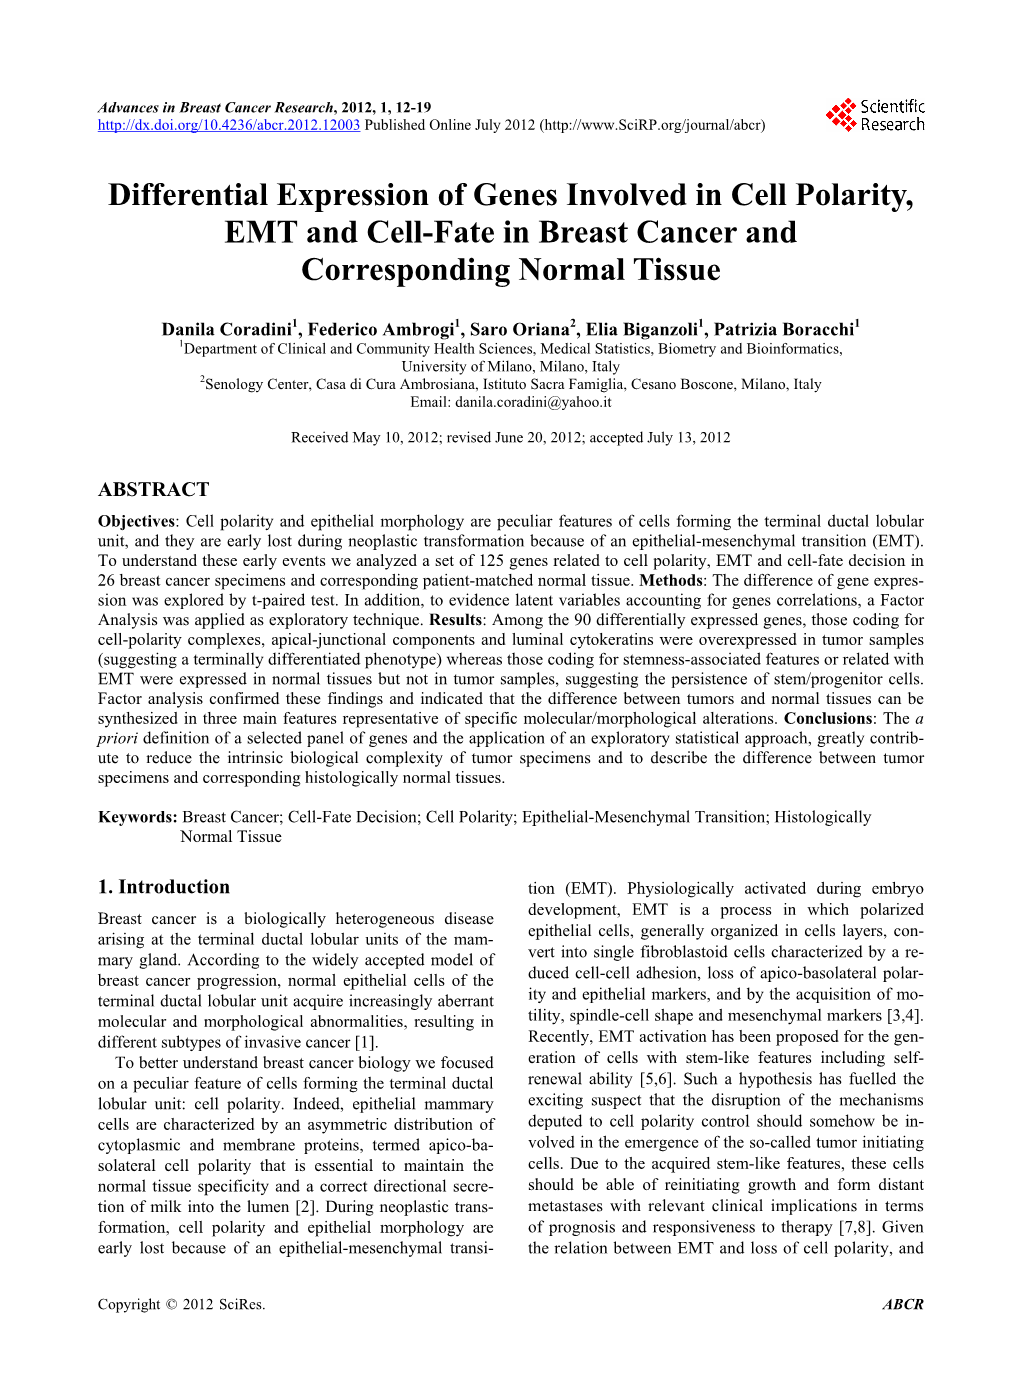 Differential Expression of Genes Involved in Cell Polarity, EMT and Cell-Fate in Breast Cancer and Corresponding Normal Tissue